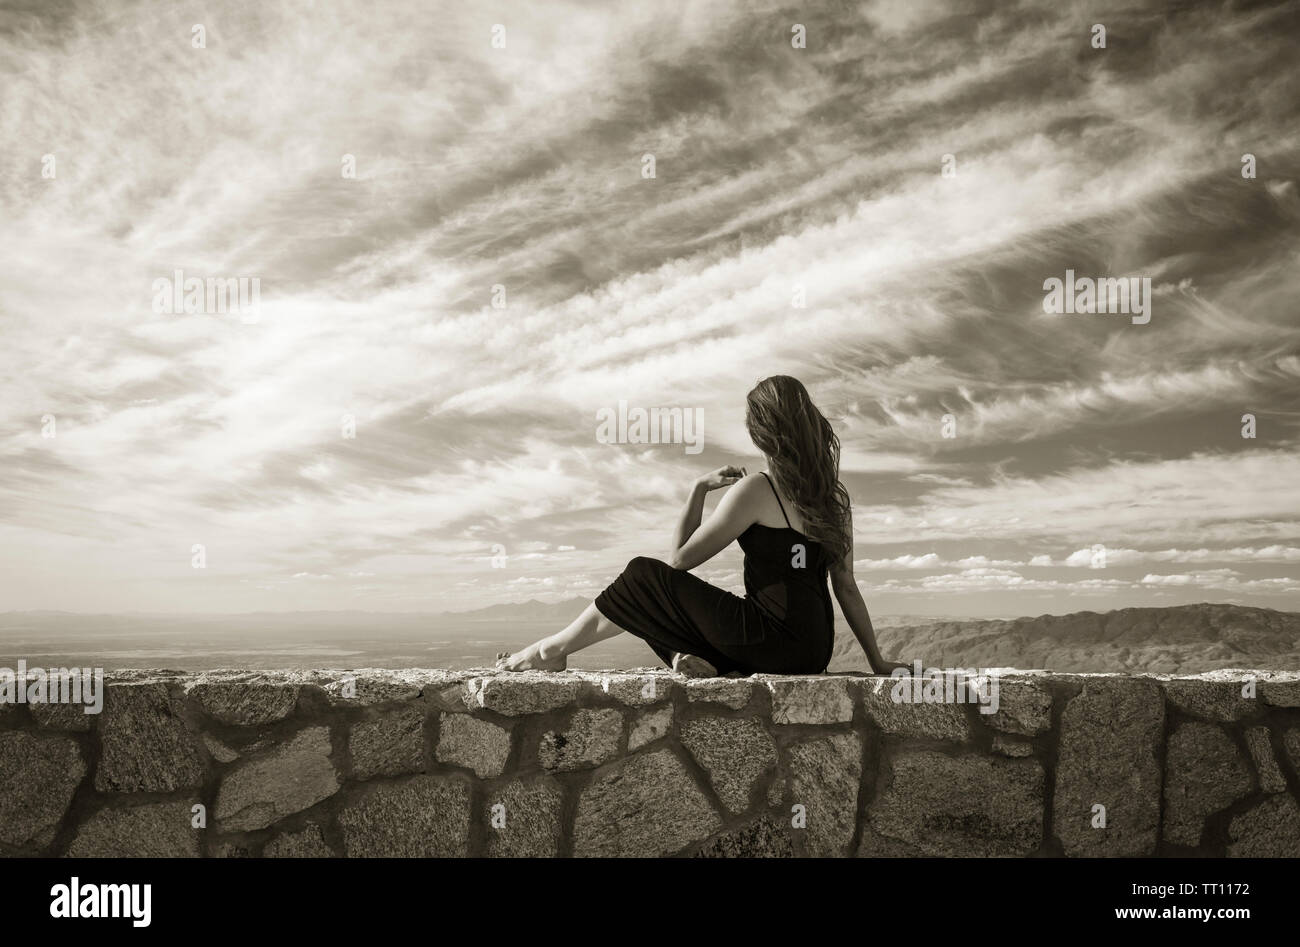 Beautiful, healthy young woman looking out at vast landscape. Beauty, health, wellness concepts. Stock Photo